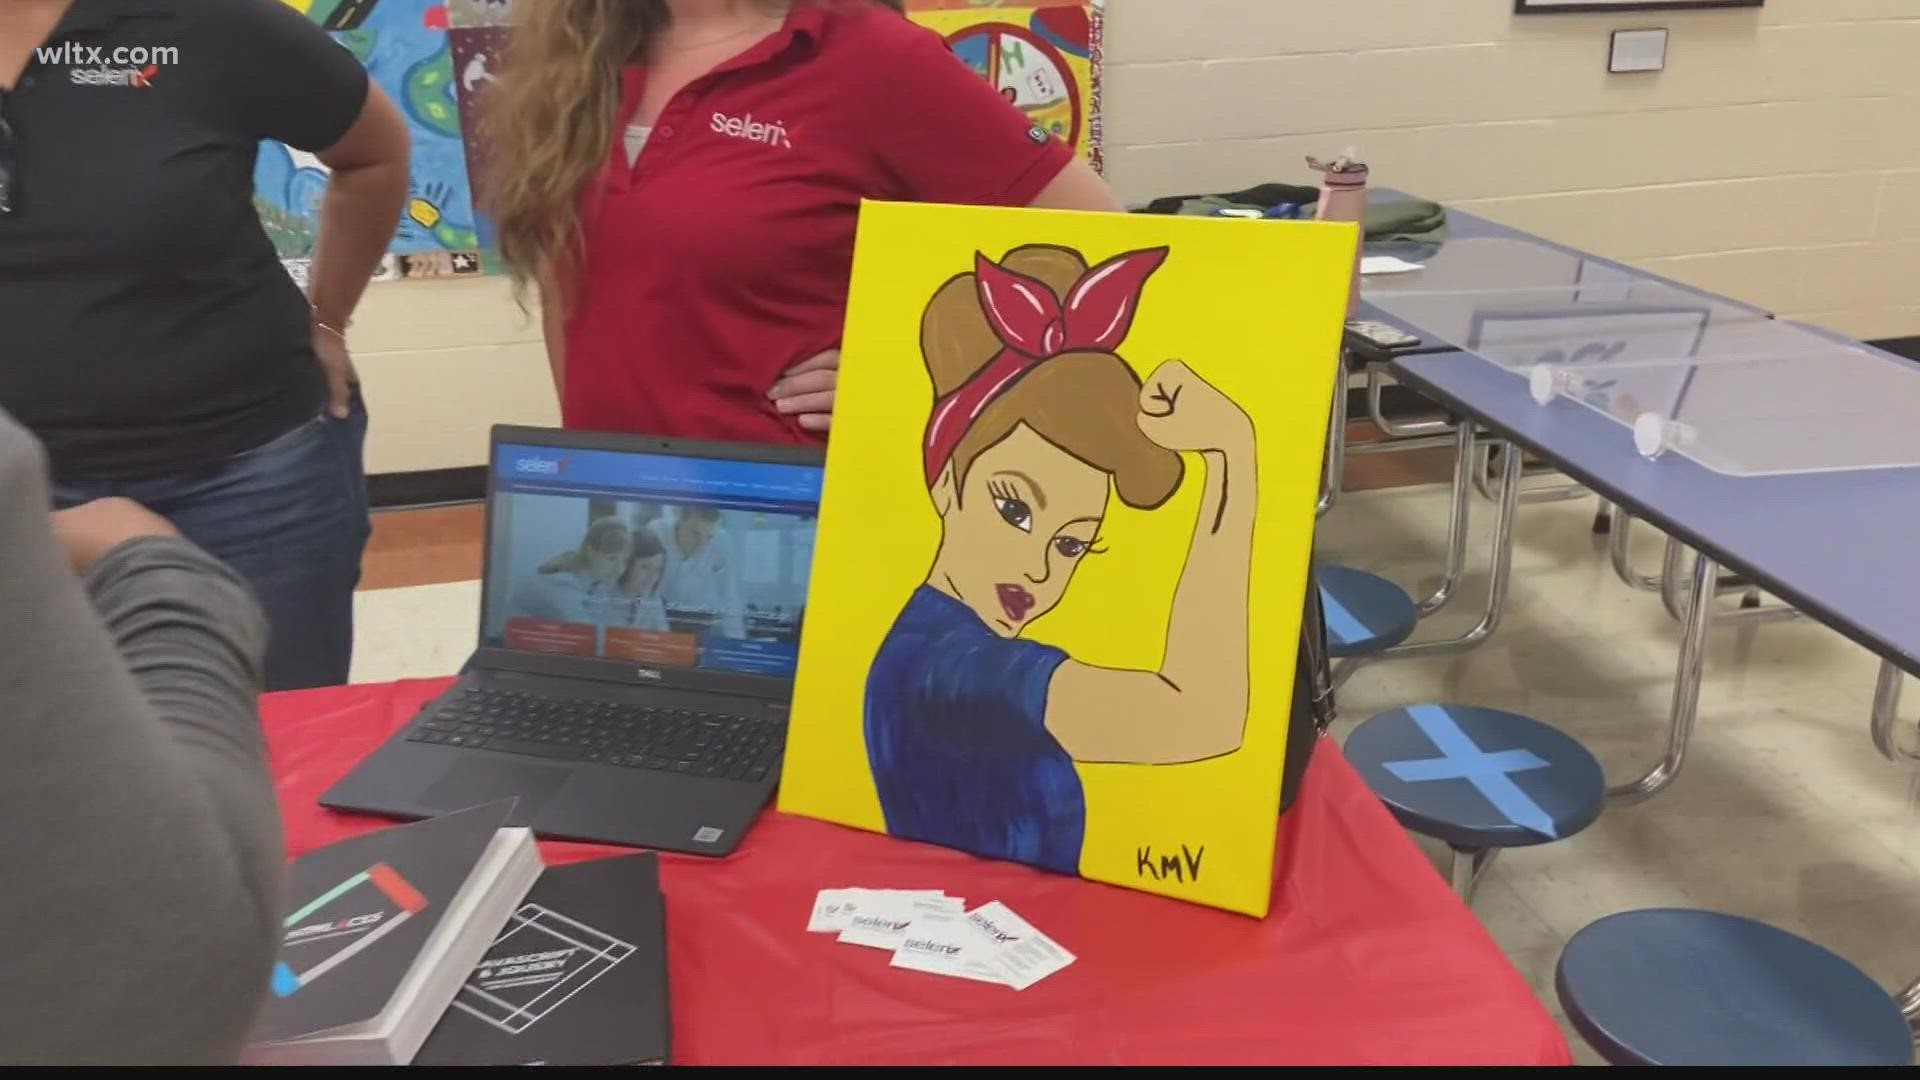 The district hosted the event to help educate students on the strength of women.